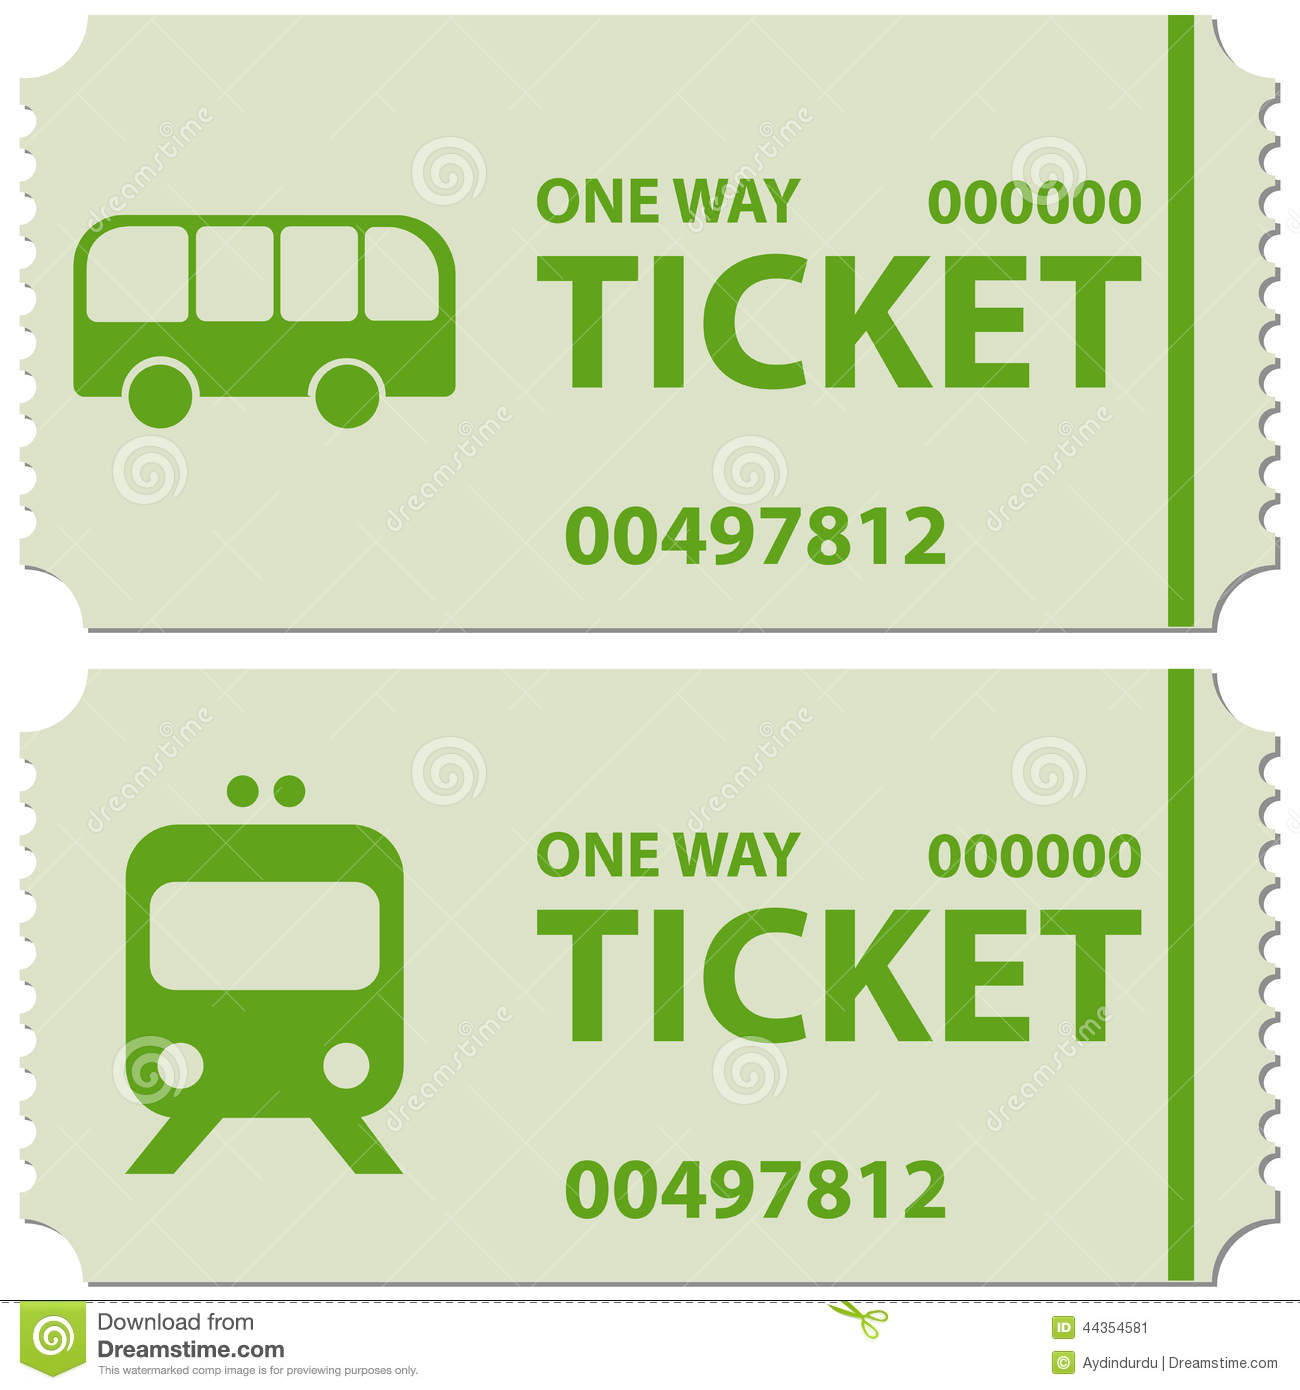 Illustration Of Bus And Train Tickets With Text   Ticket One Way   In